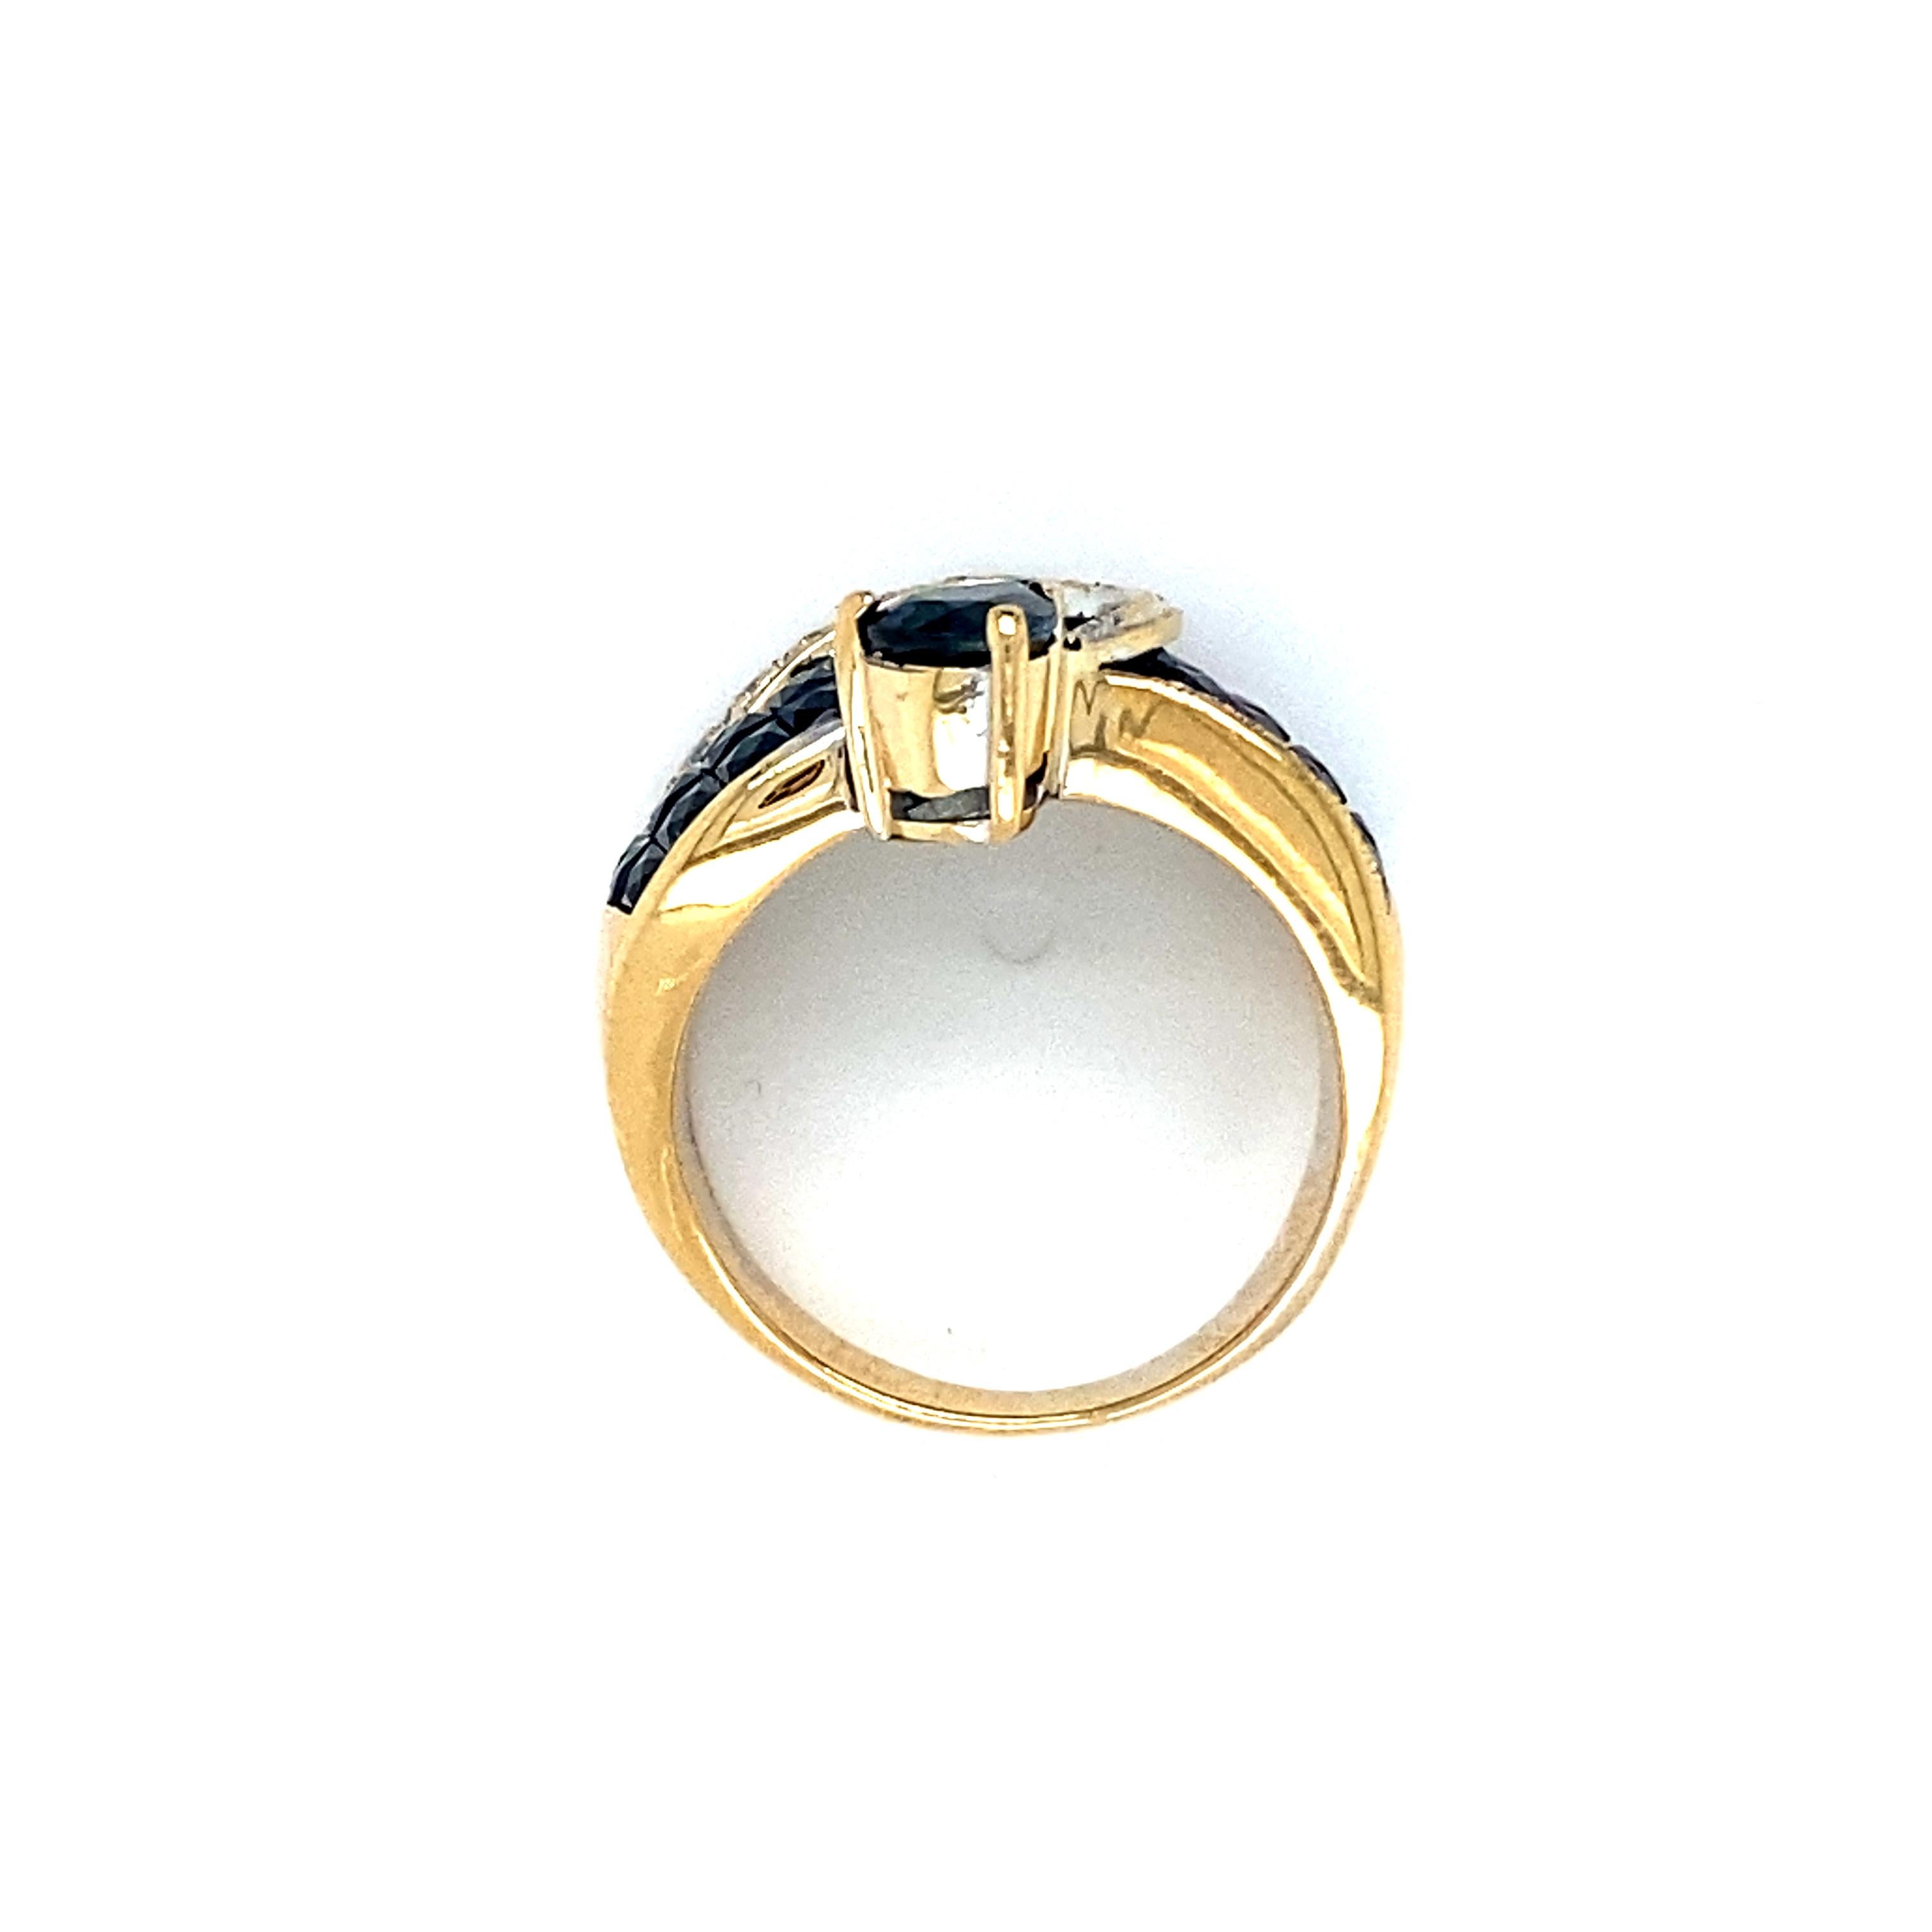 French Cut Amazing Vintage 18K Yellow Gold Diamond and Sapphire Invisible Set Ring.